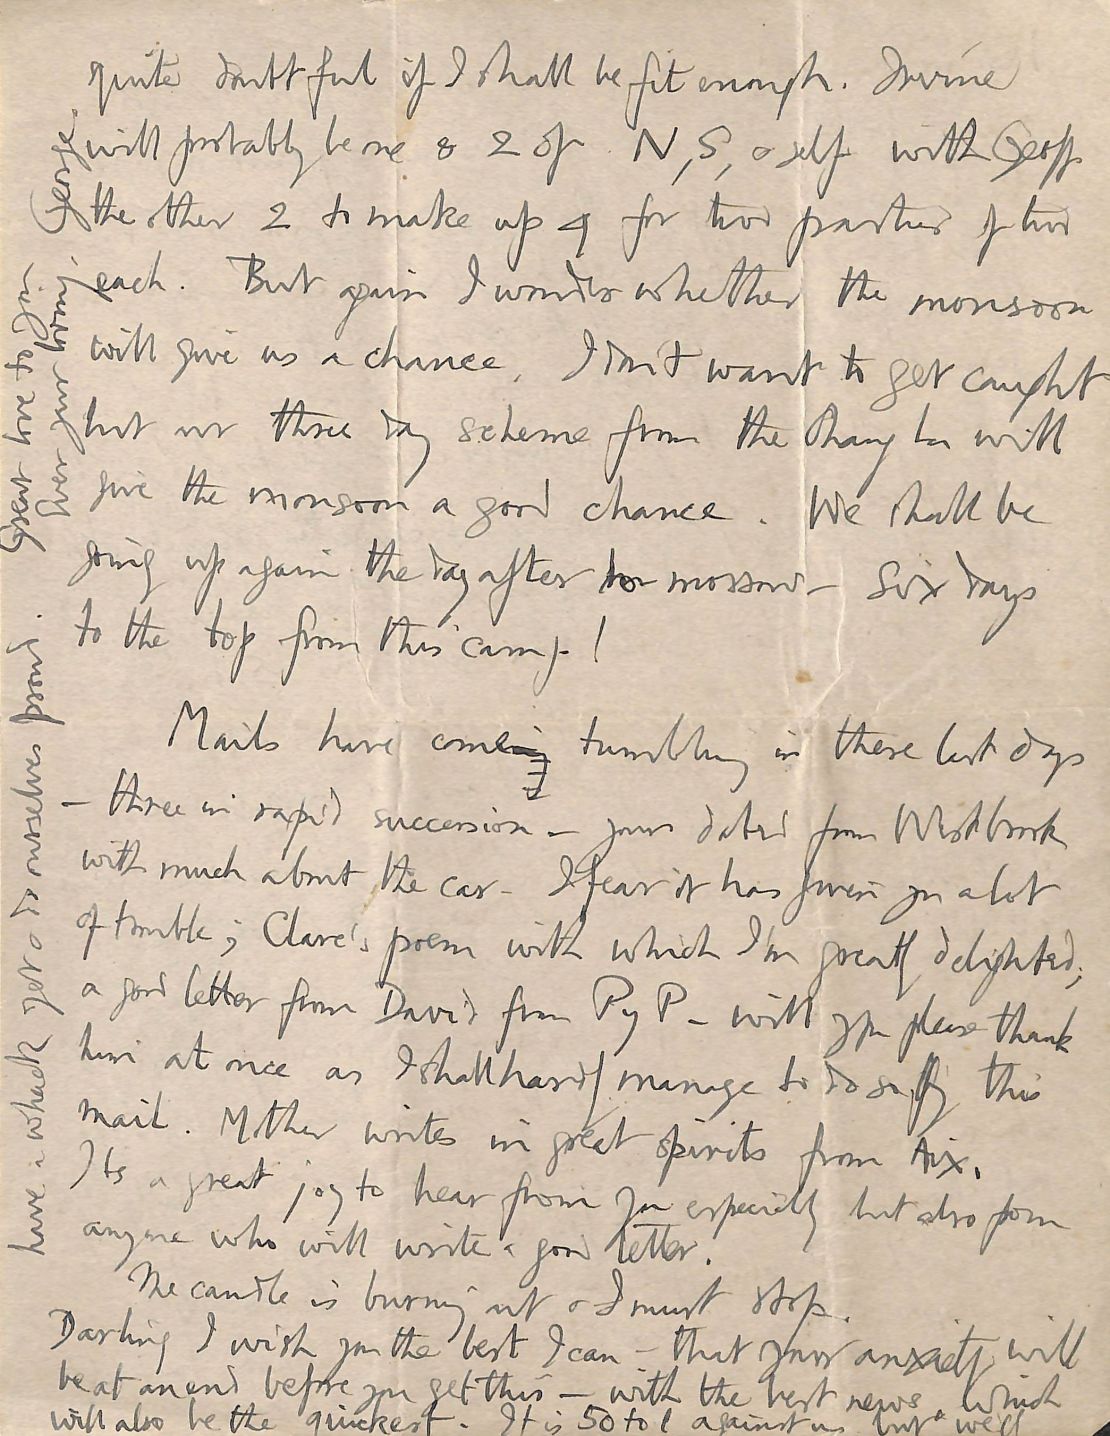 During his travels, letters from his wife provided Mallory with much-needed stability during the most challenging times, according to a college archivist at Magdalene College, Cambridge.